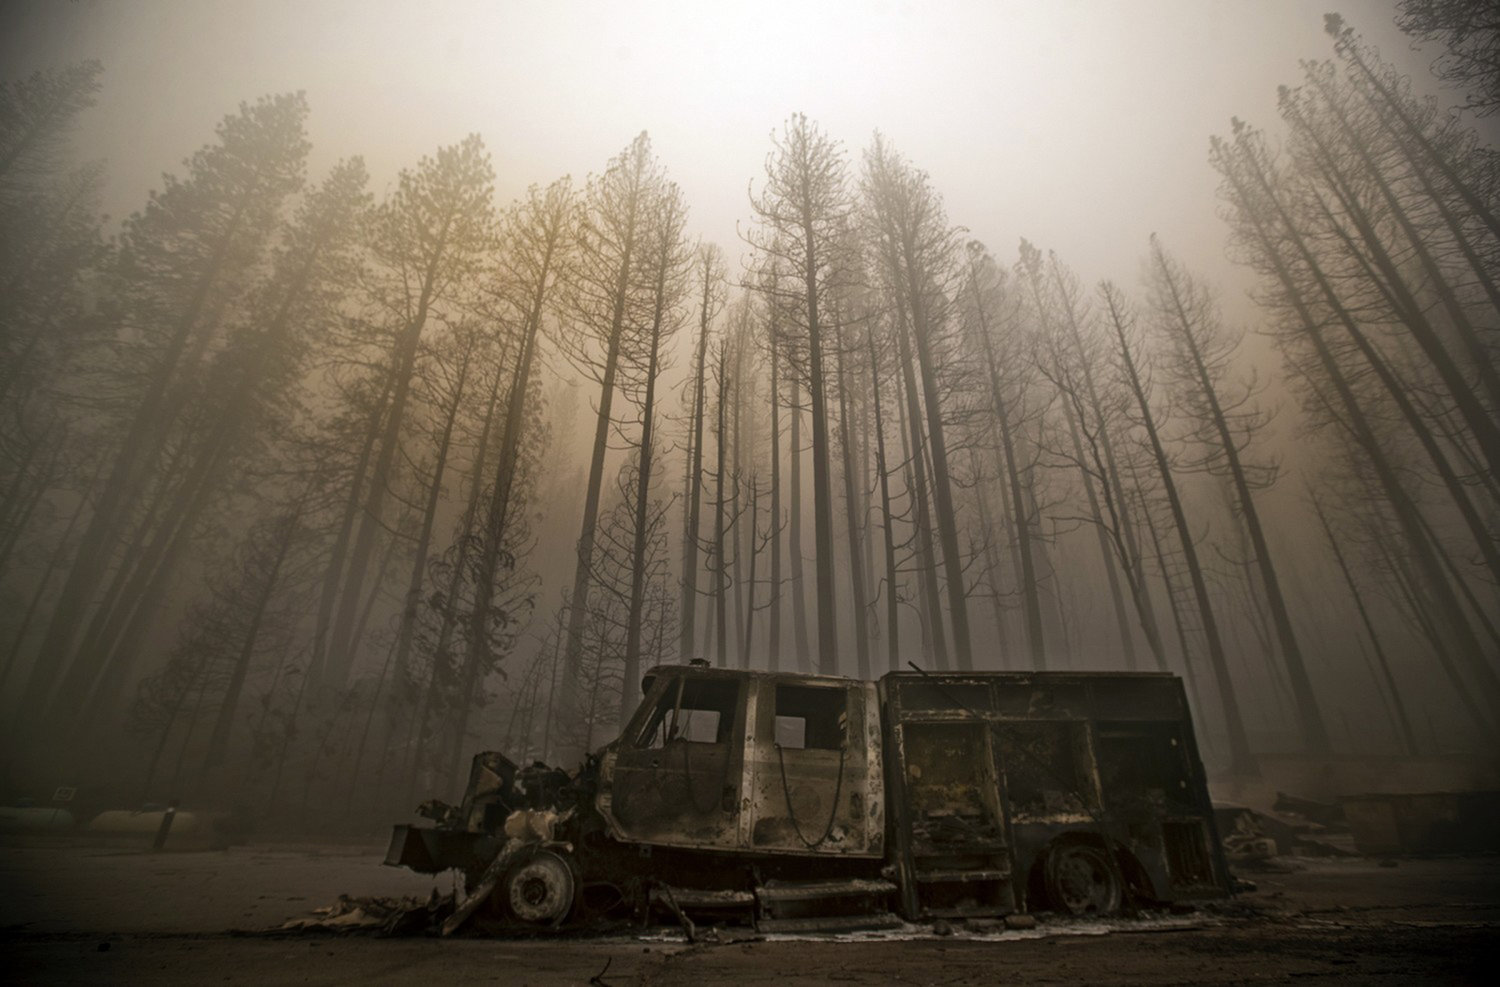 Burned trees rise above a truck destroyed by the Dixie Fire in the town of Greenville. (Mel Melcon/Los Angeles Times/TNS)